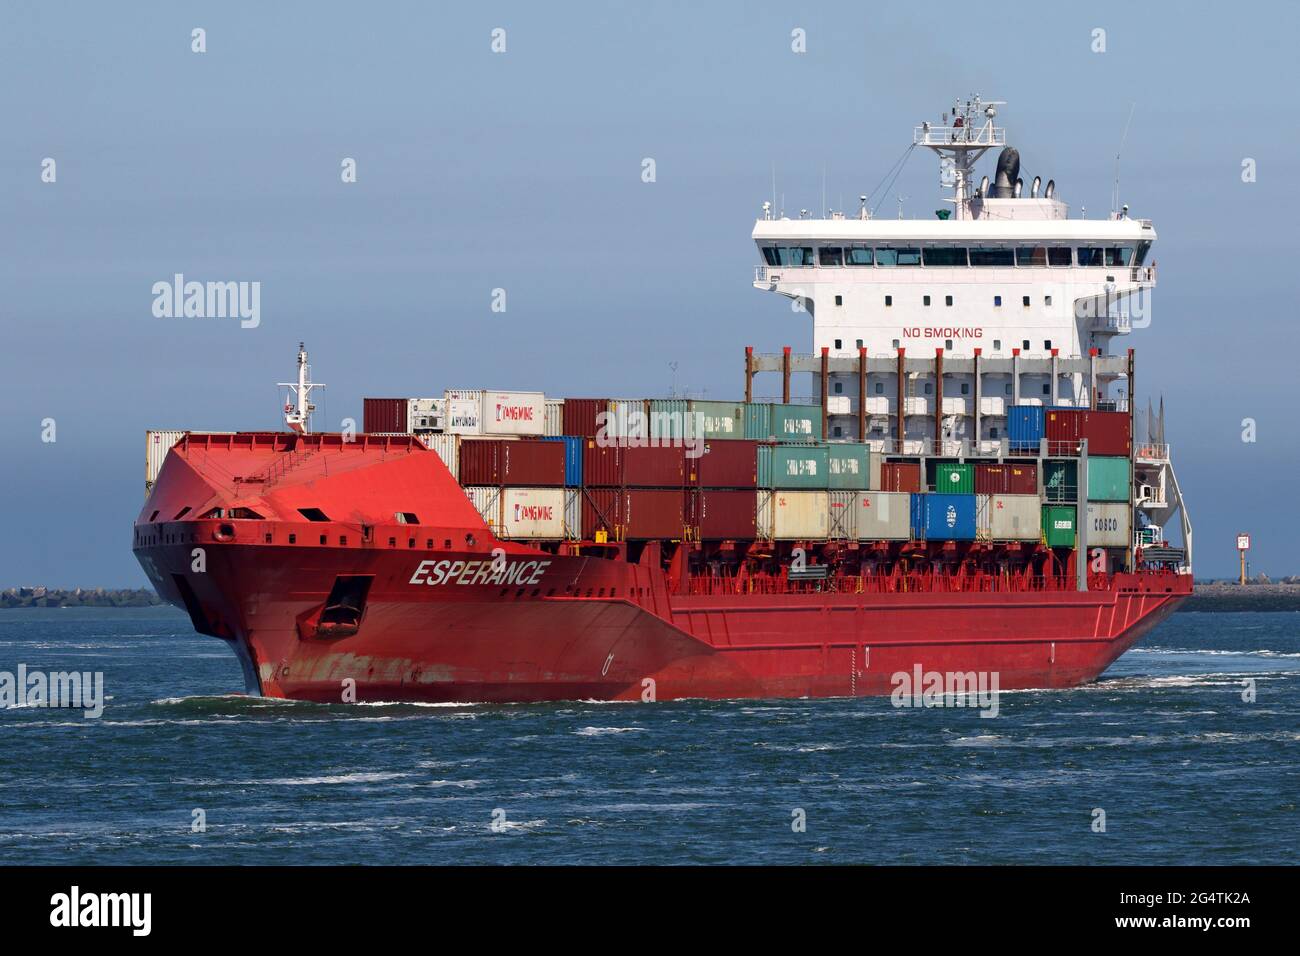 The feeder ship Esperance will reach the port of Rotterdam on May 29, 2021. Stock Photo